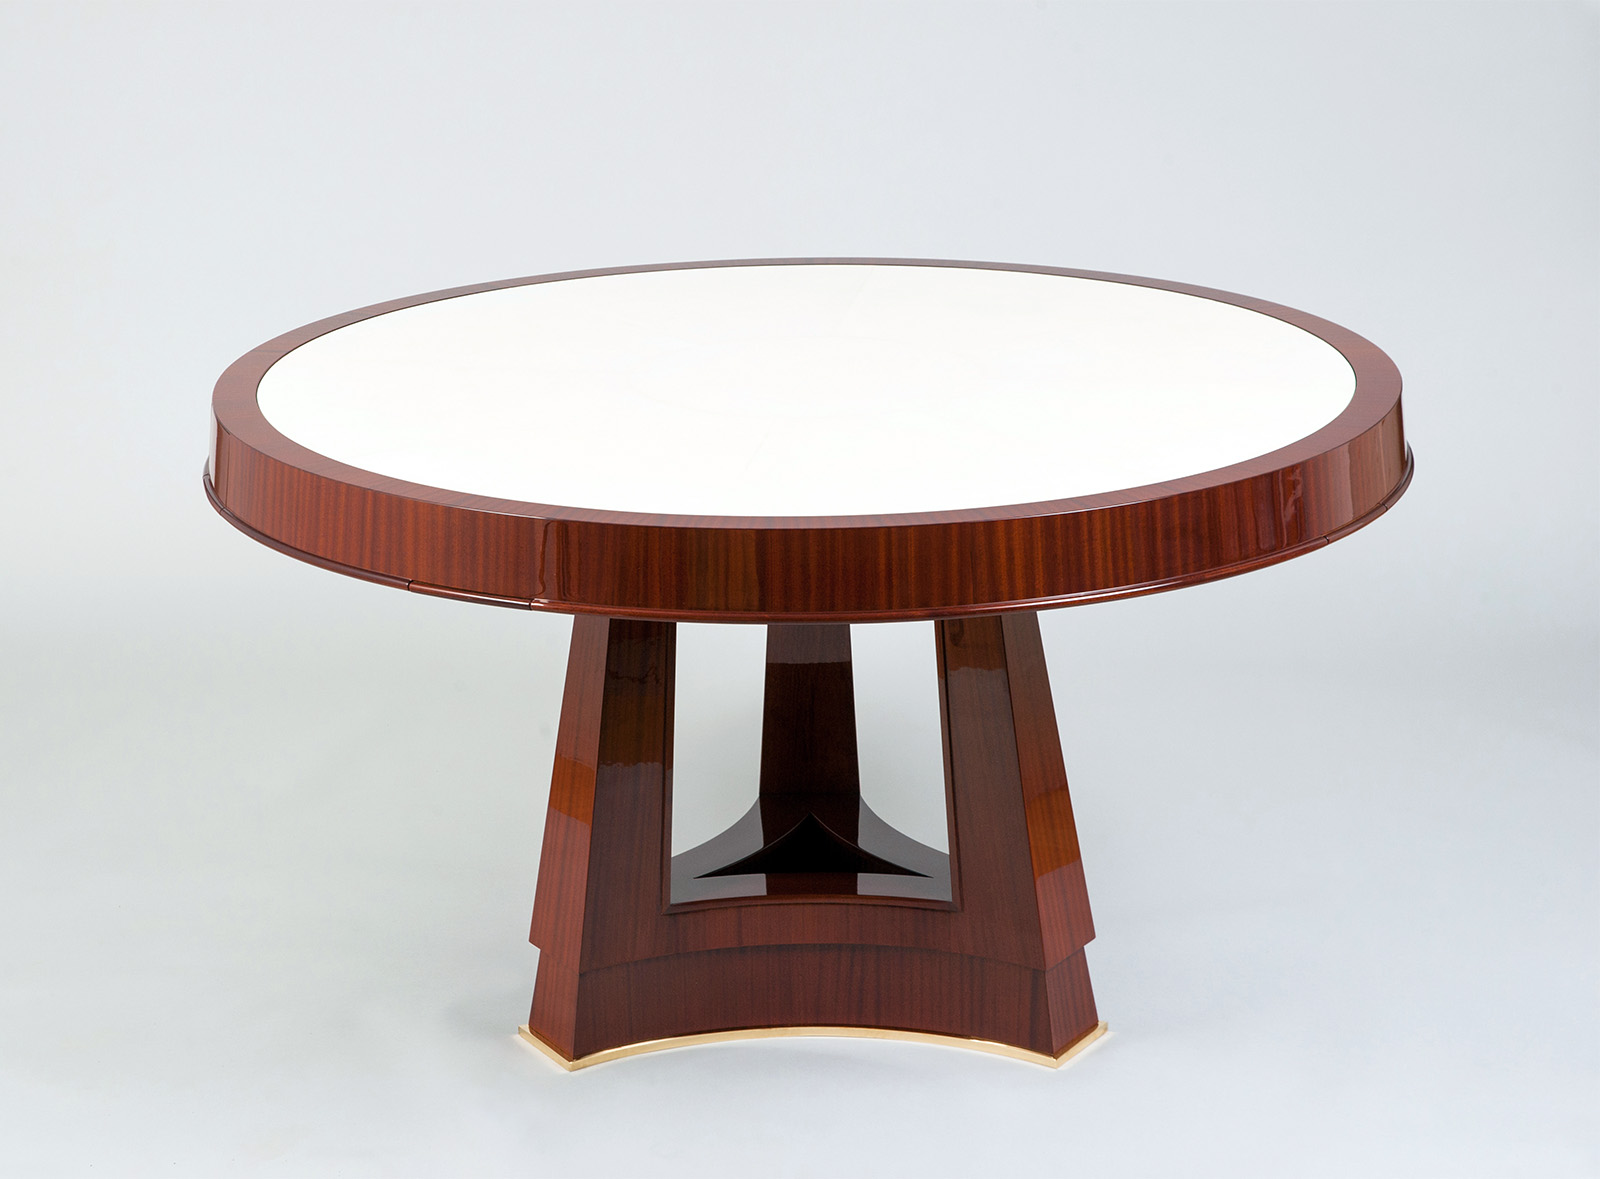 A French Art Deco Inspired Game Table by ILIAD Design